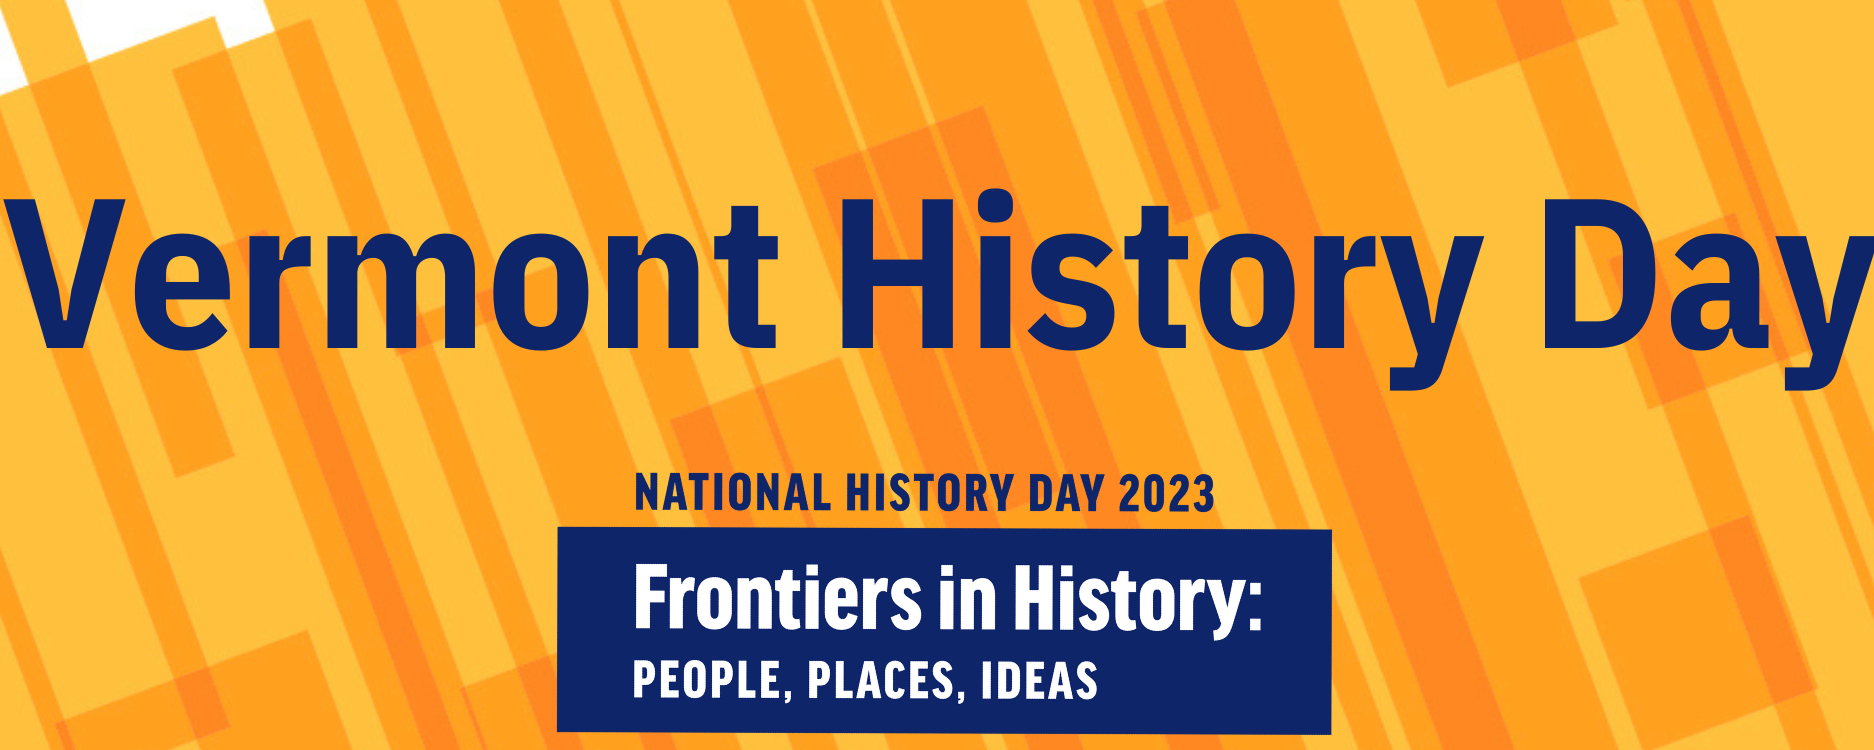 Vermont History Day: National History Day 2023: Frontiers in History: People, Places, Ideas